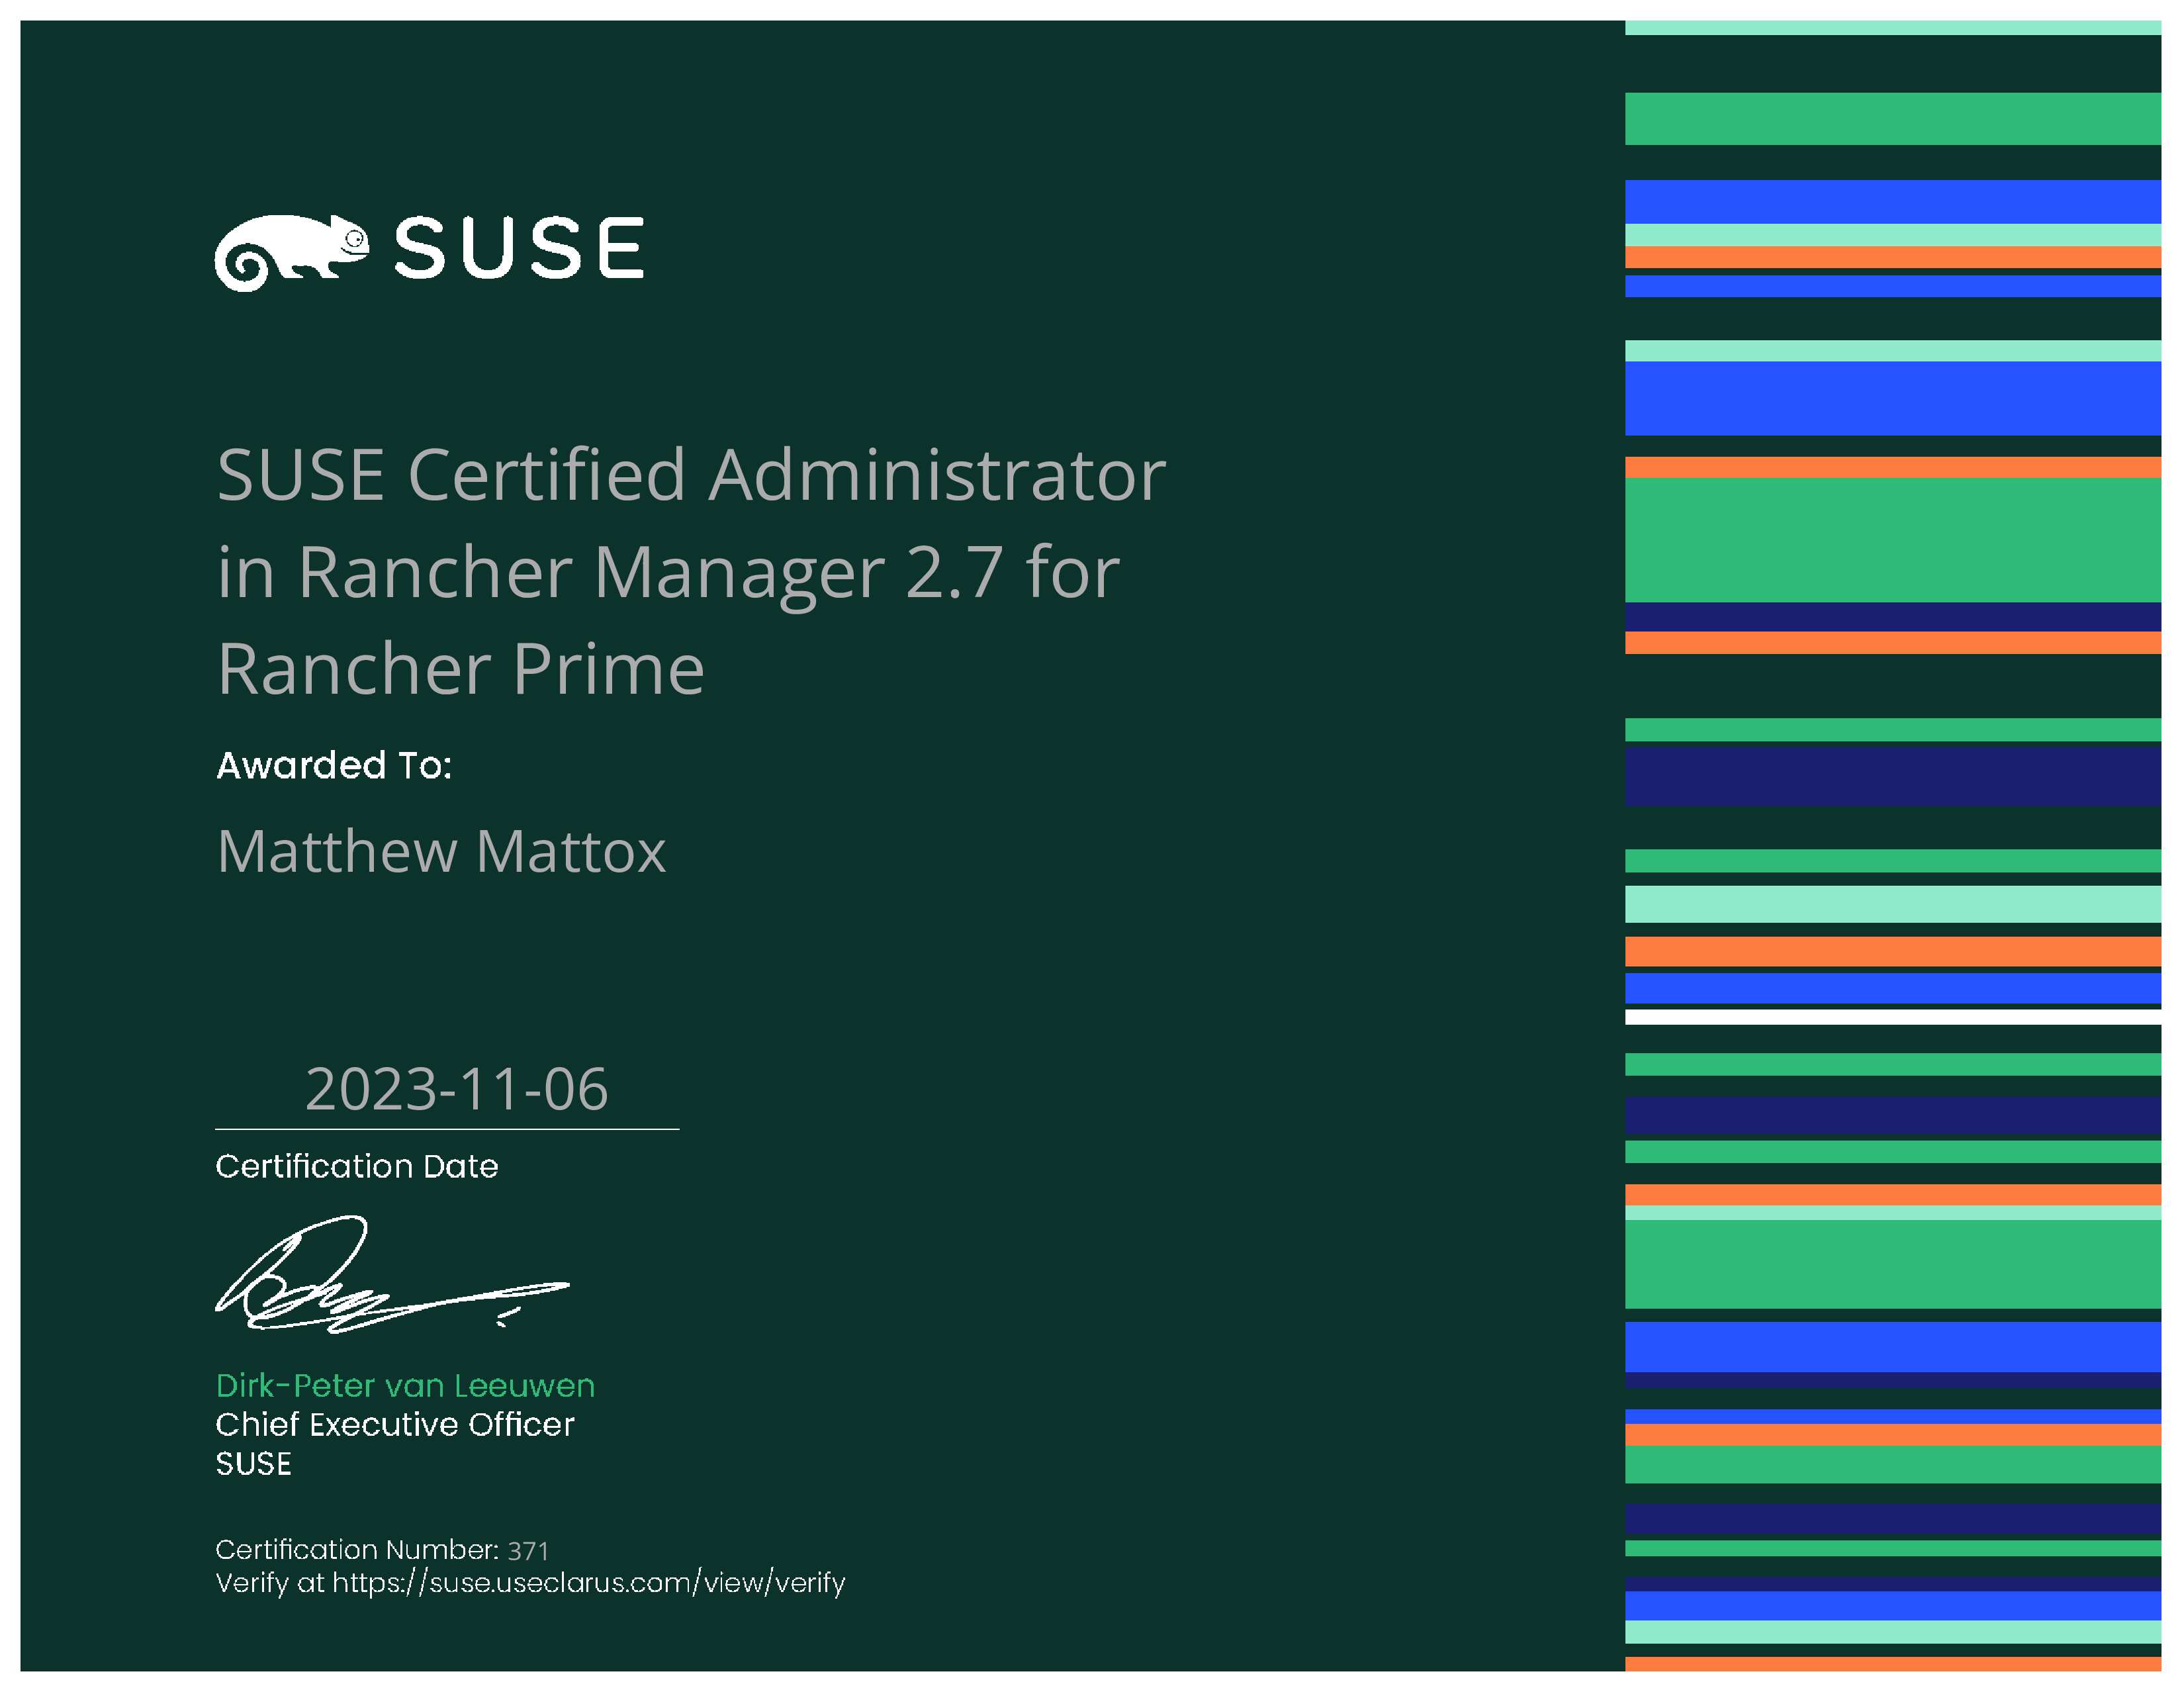 SUSE Certified Administrator in SUSE Rancher 2.7